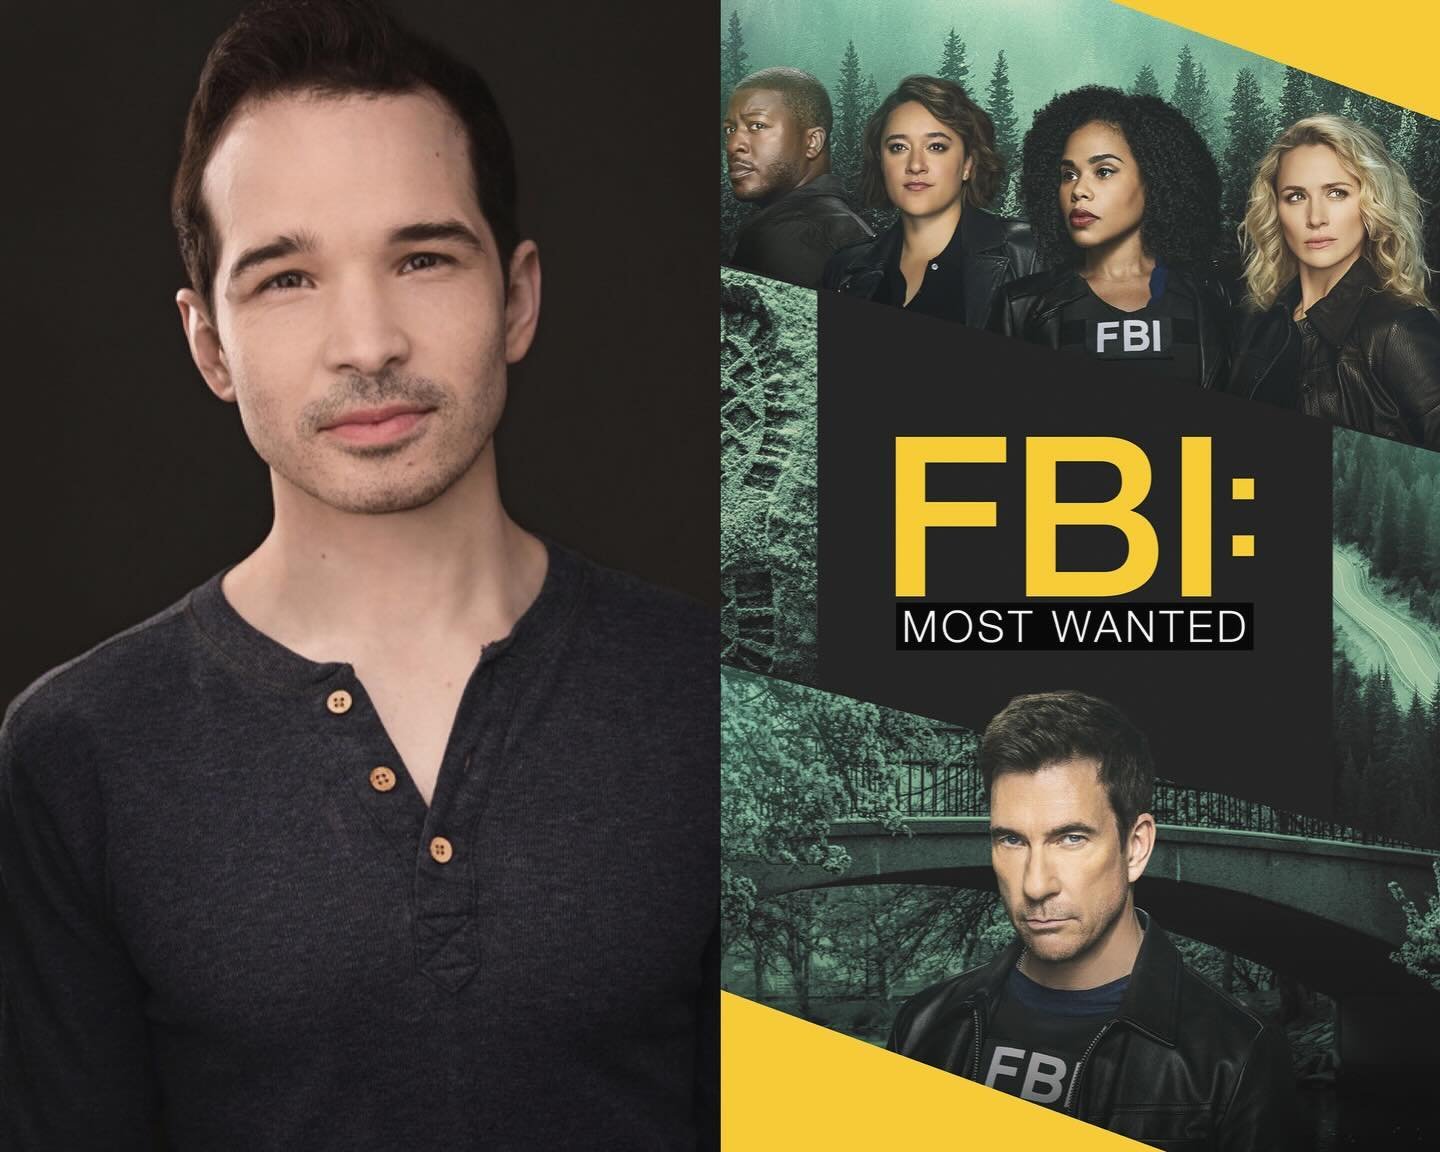 Catch @koray.tarhan on tonight&rsquo;s episode of FBI: MOST WANTED! ⭐️